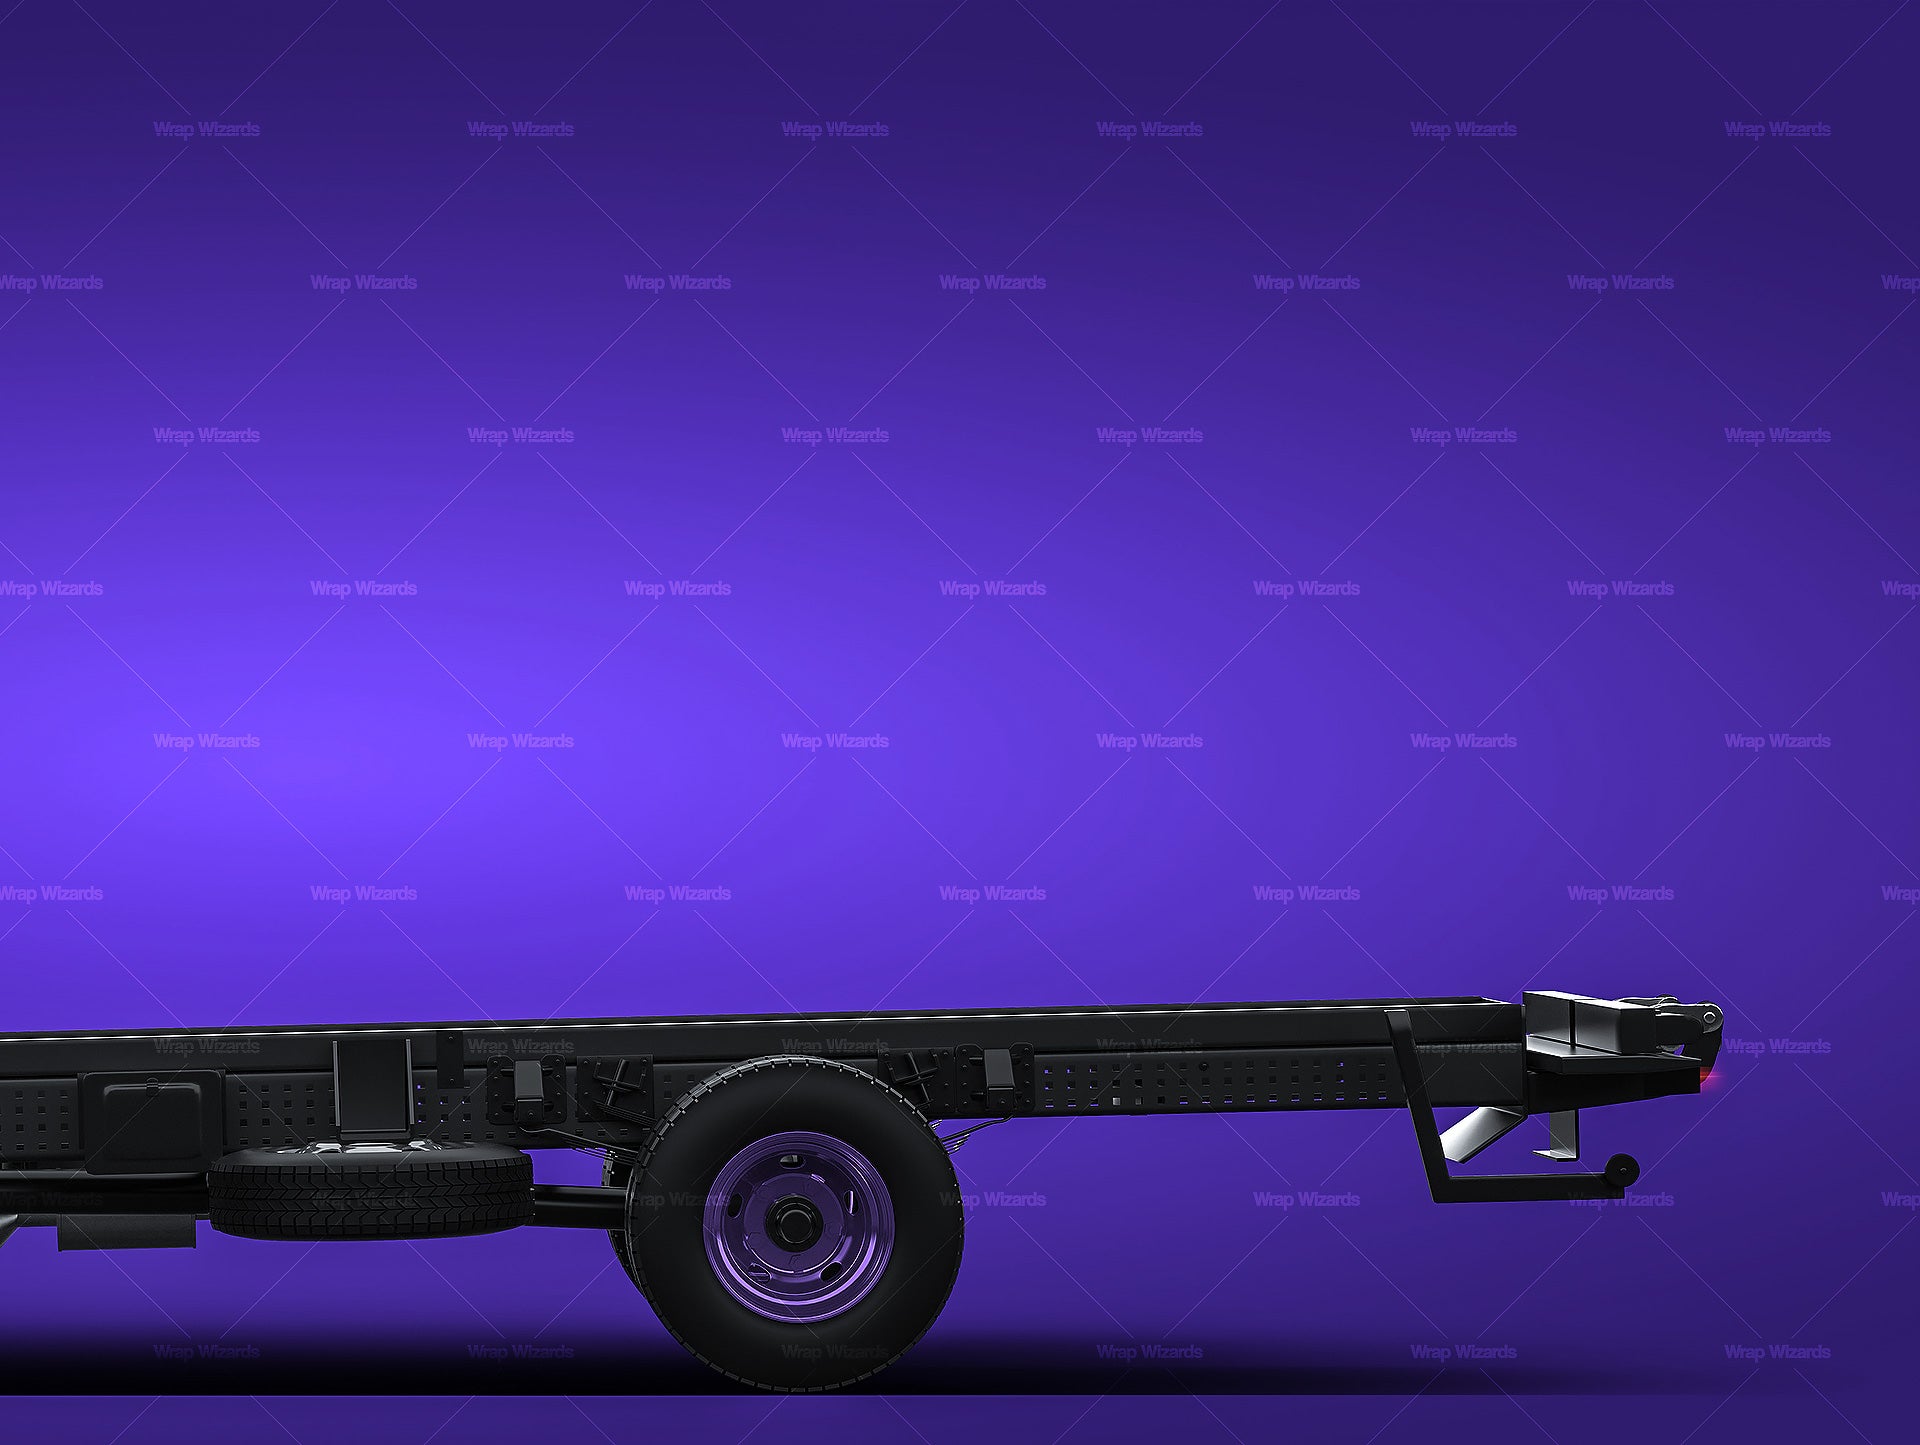 Mitsubishi Fuso Canter 515 Wide Single Cab chassis glossy finish - all sides Car Mockup Template.psd